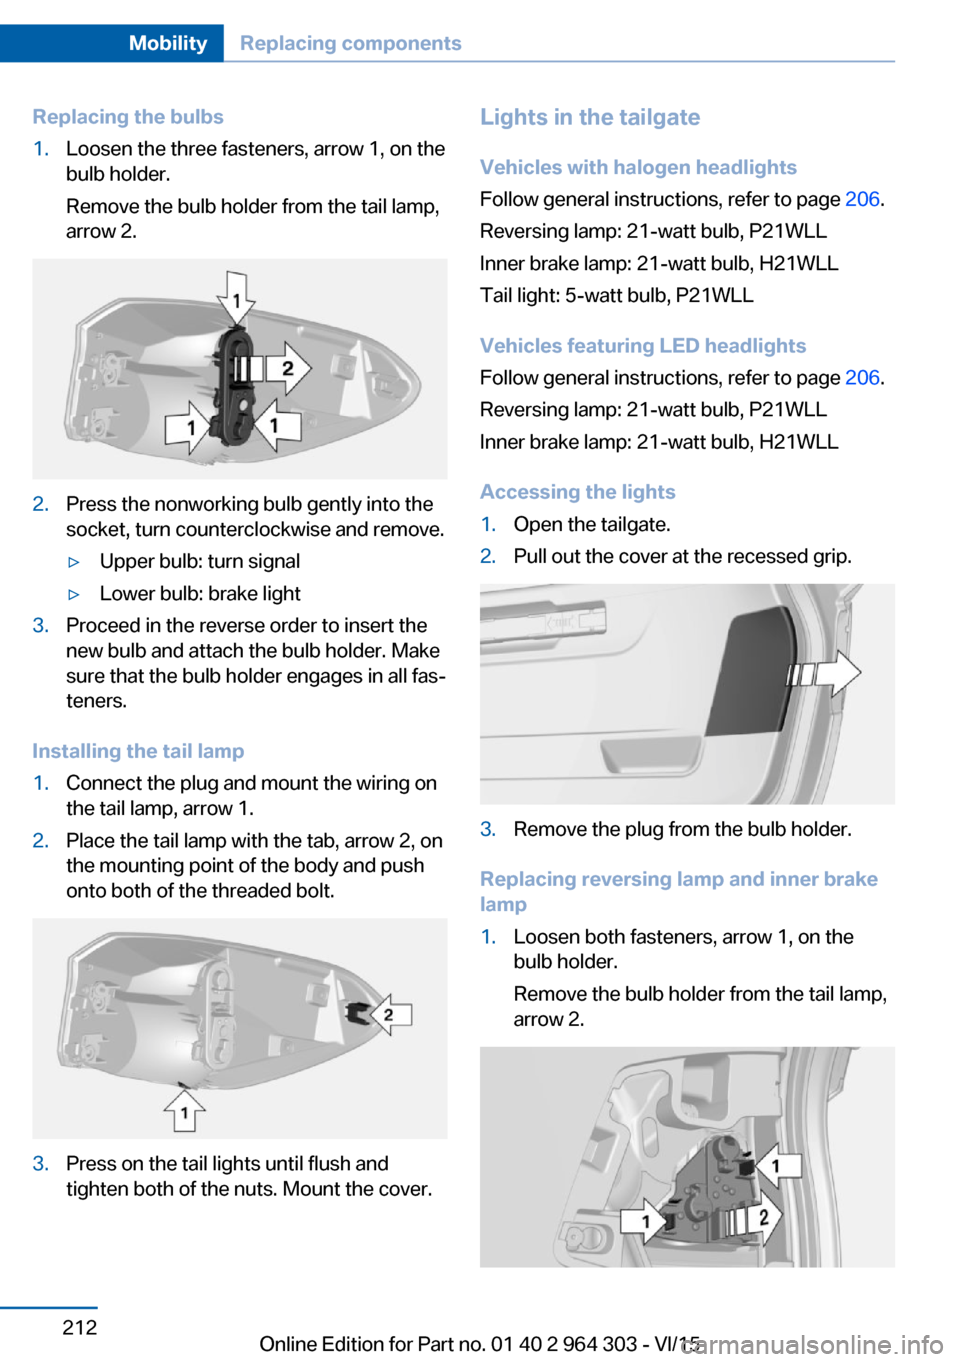 BMW X1 2016 F48 Owners Manual Replacing the bulbs1.Loosen the three fasteners, arrow 1, on the
bulb holder.
Remove the bulb holder from the tail lamp,
arrow 2.2.Press the nonworking bulb gently into the
socket, turn counterclockwi